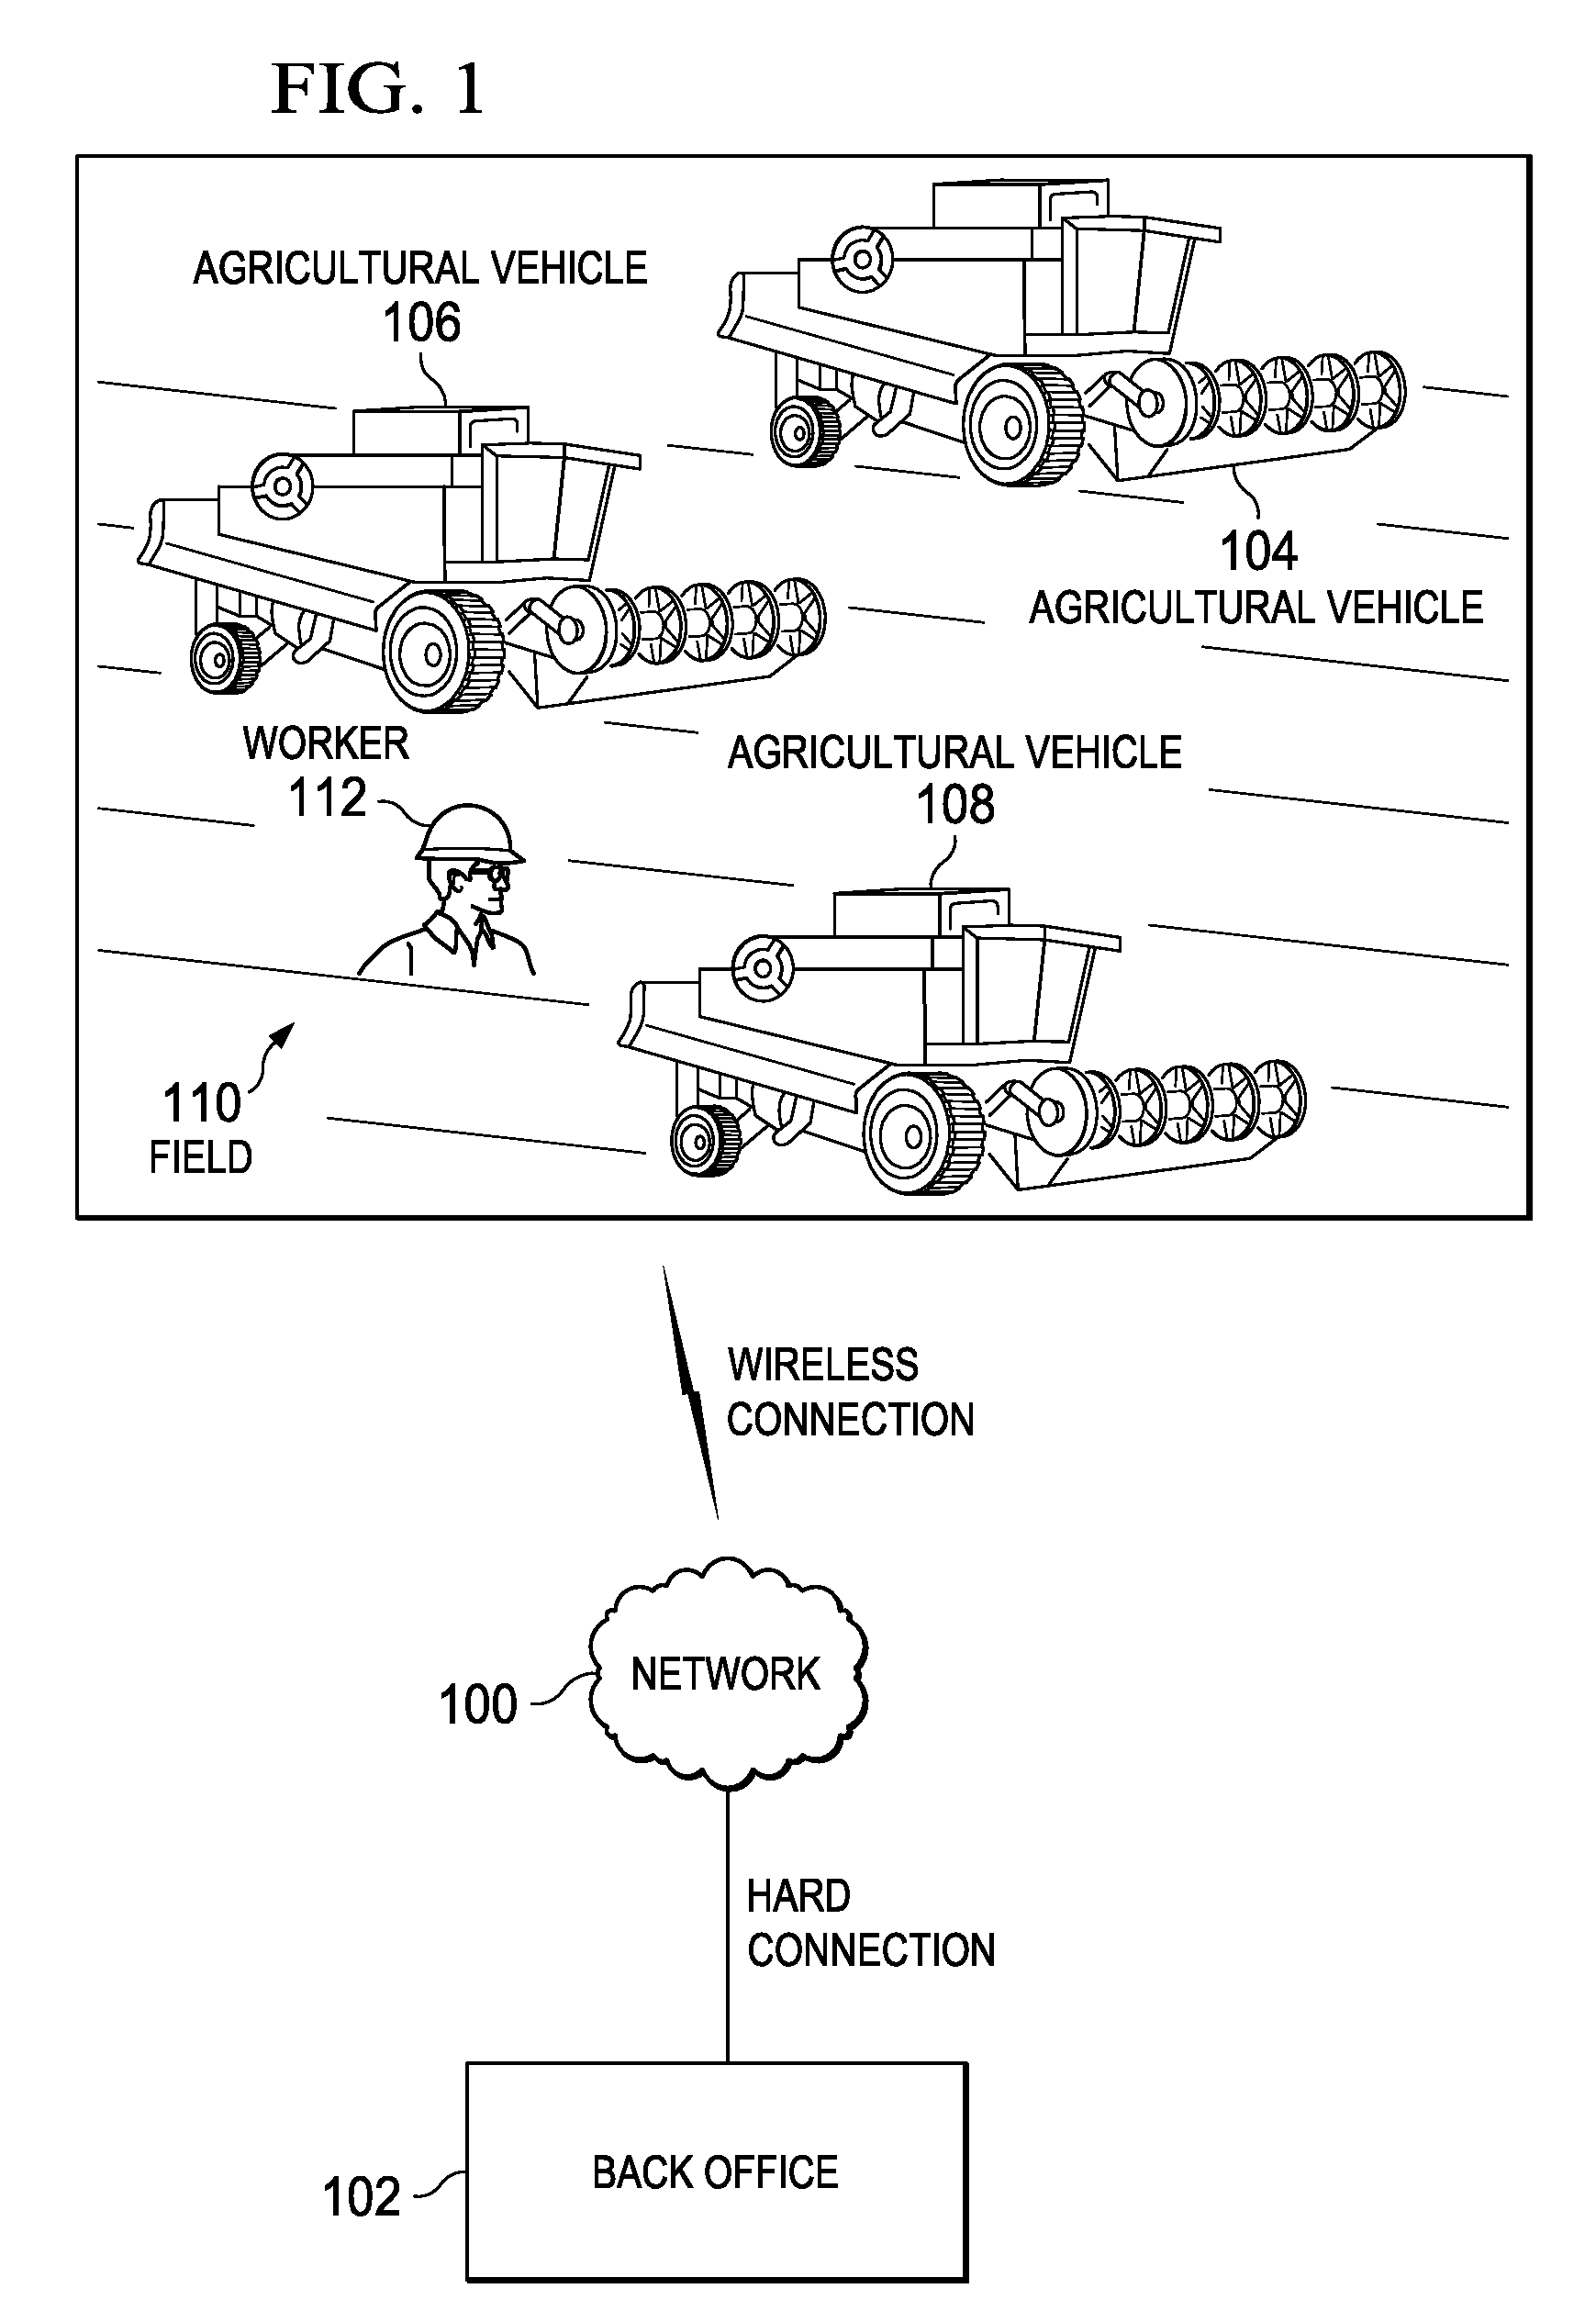 High integrity coordination for multiple off-road vehicles